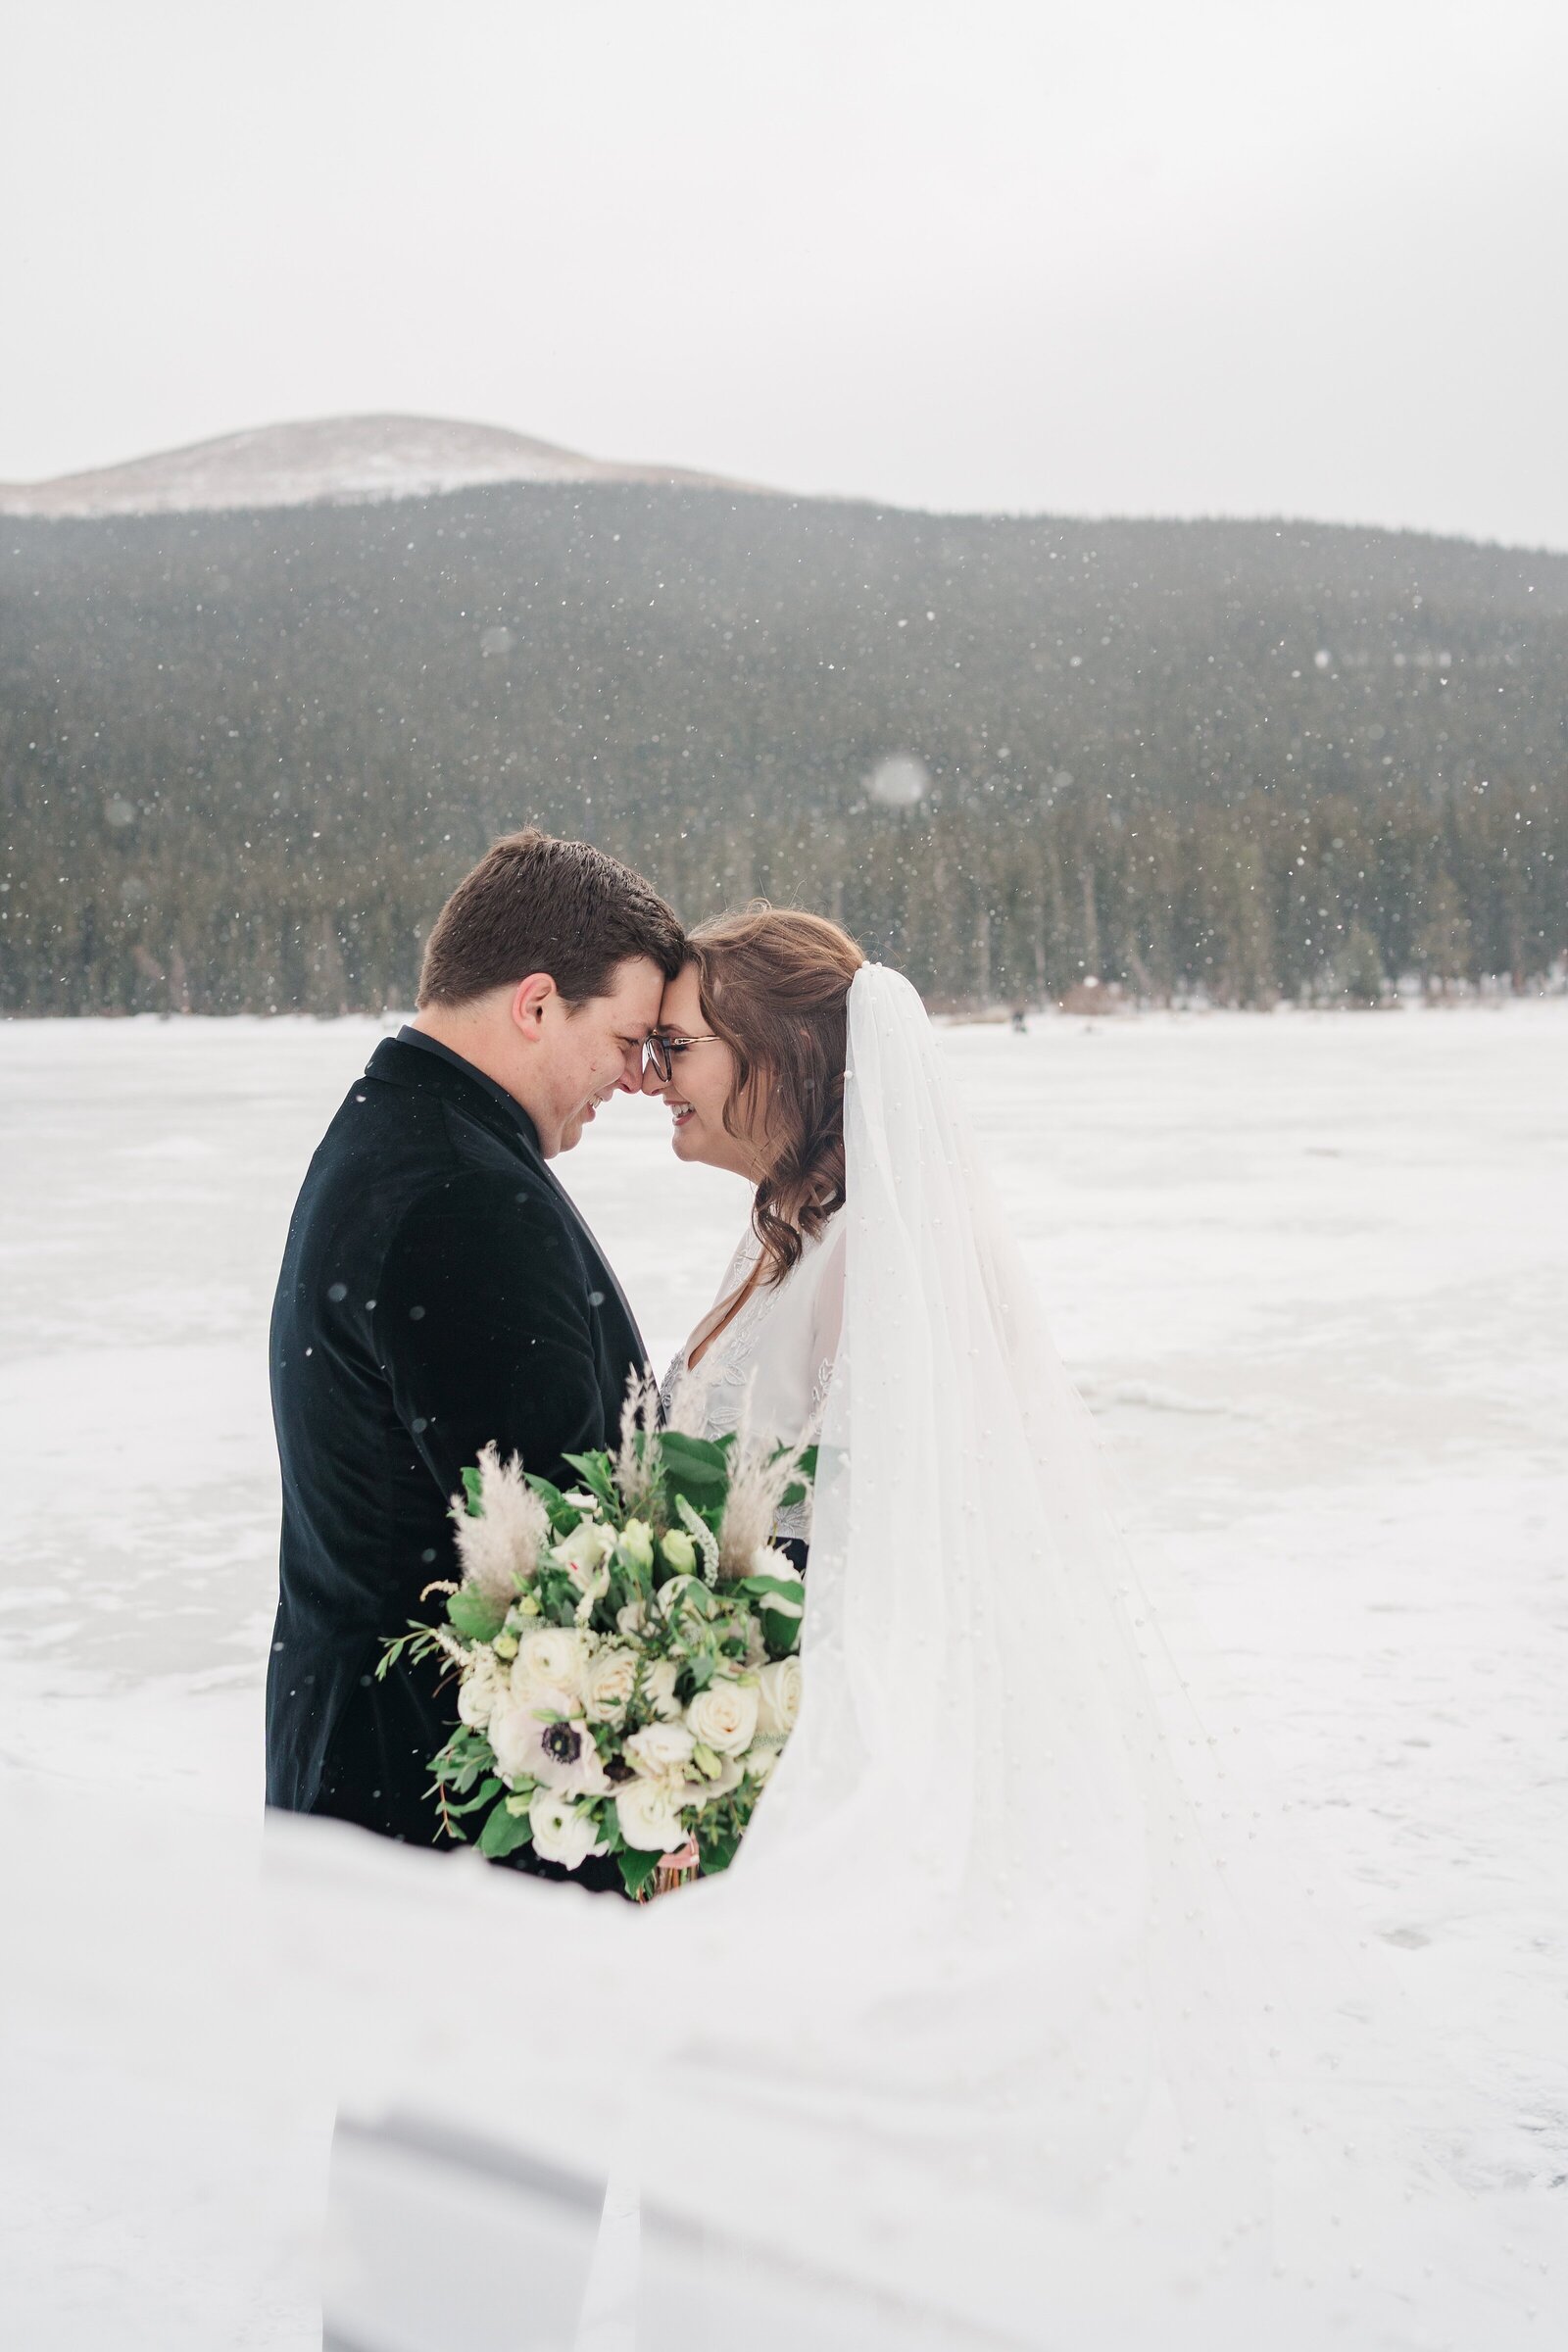 Rocky Mountains Elopement Photography with Samantha Immer" - Trust an experienced and skilled photographer to capture the beauty and majesty of the Rocky Mountains on your elopement day.